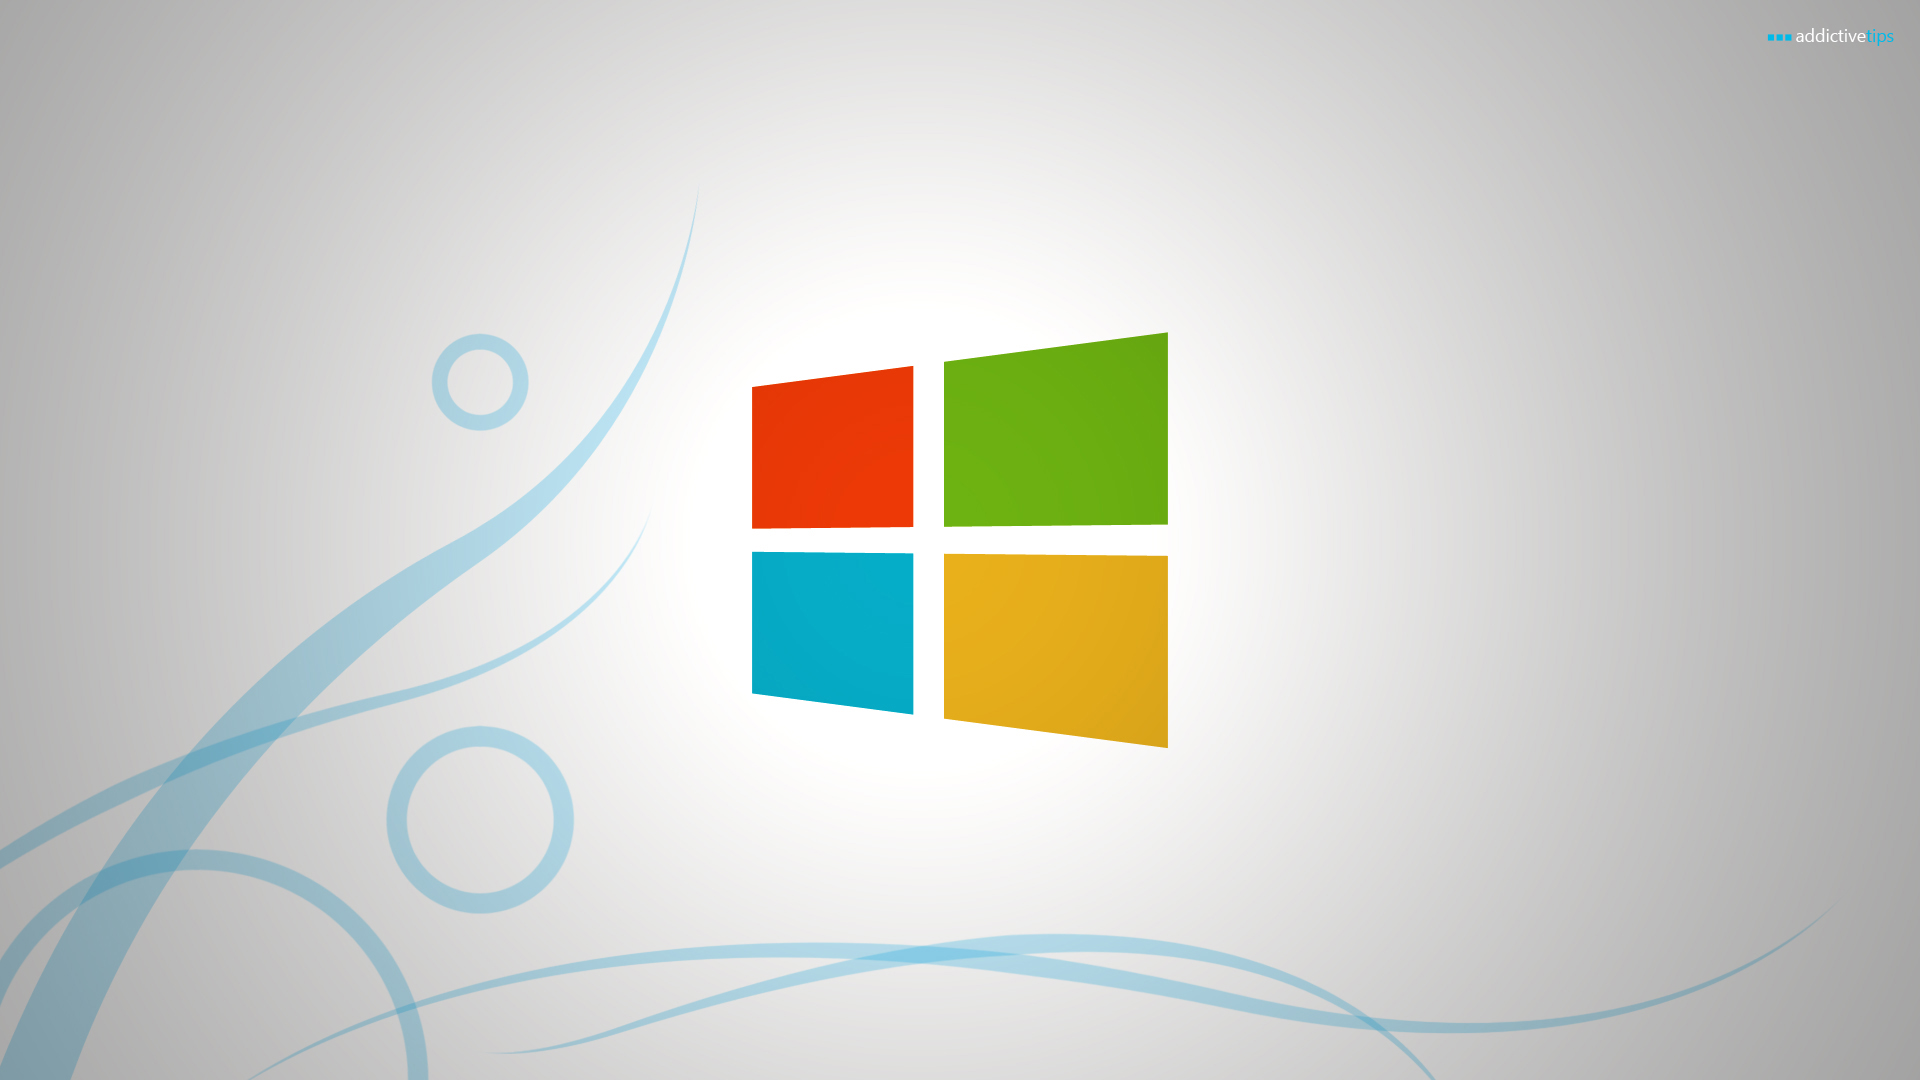 Download Our Windows 8 Metro Wallpapers